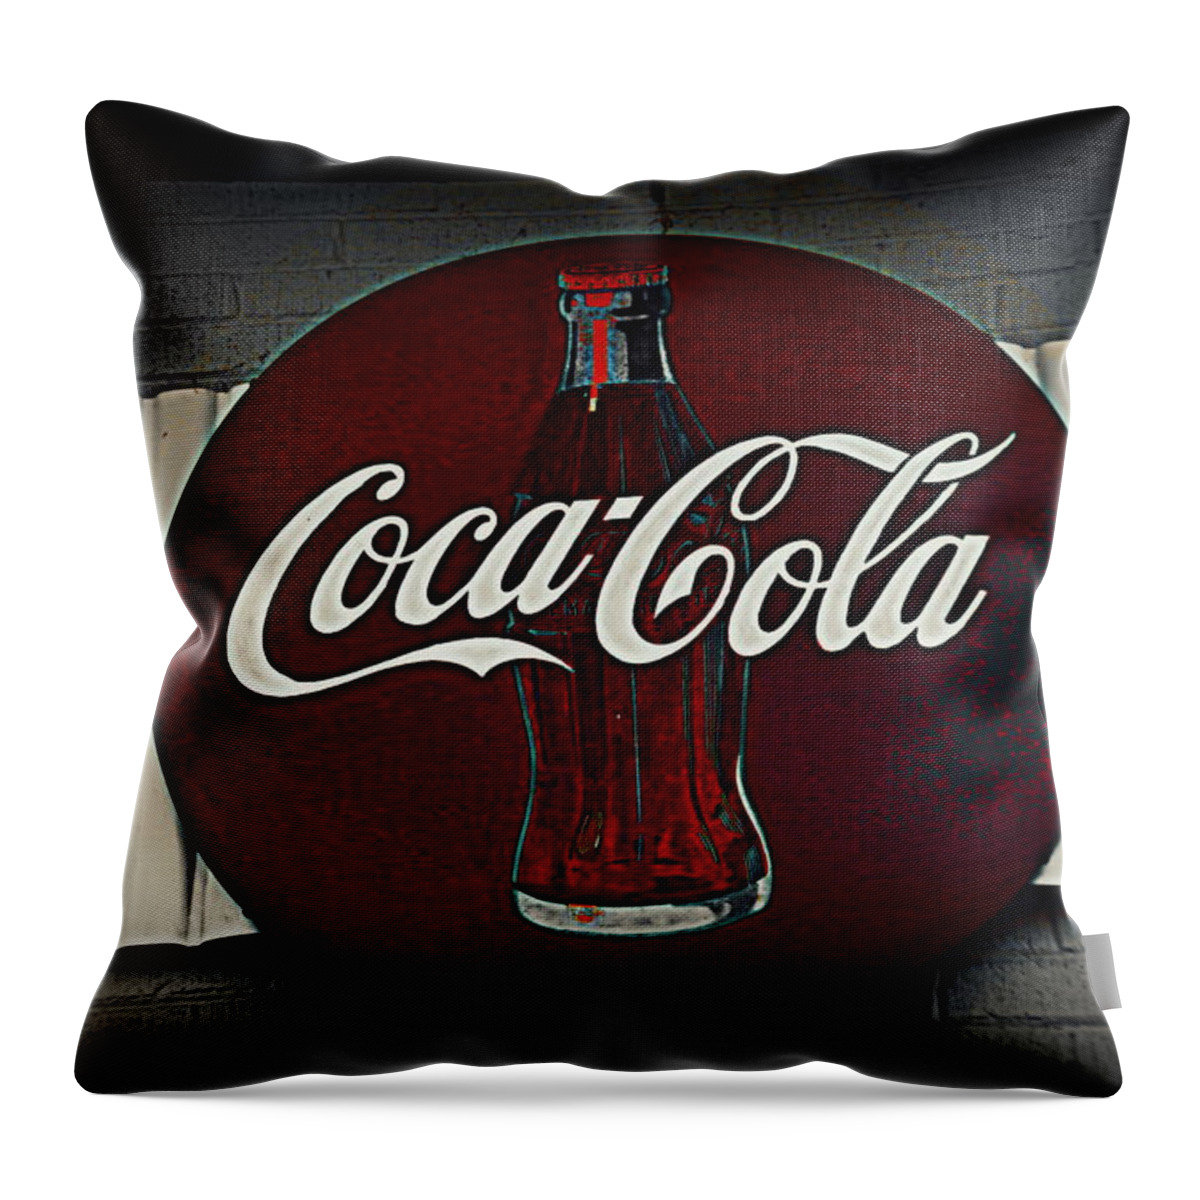 Coca Cola Throw Pillow featuring the photograph Coca Cola sign by Lisa Wooten